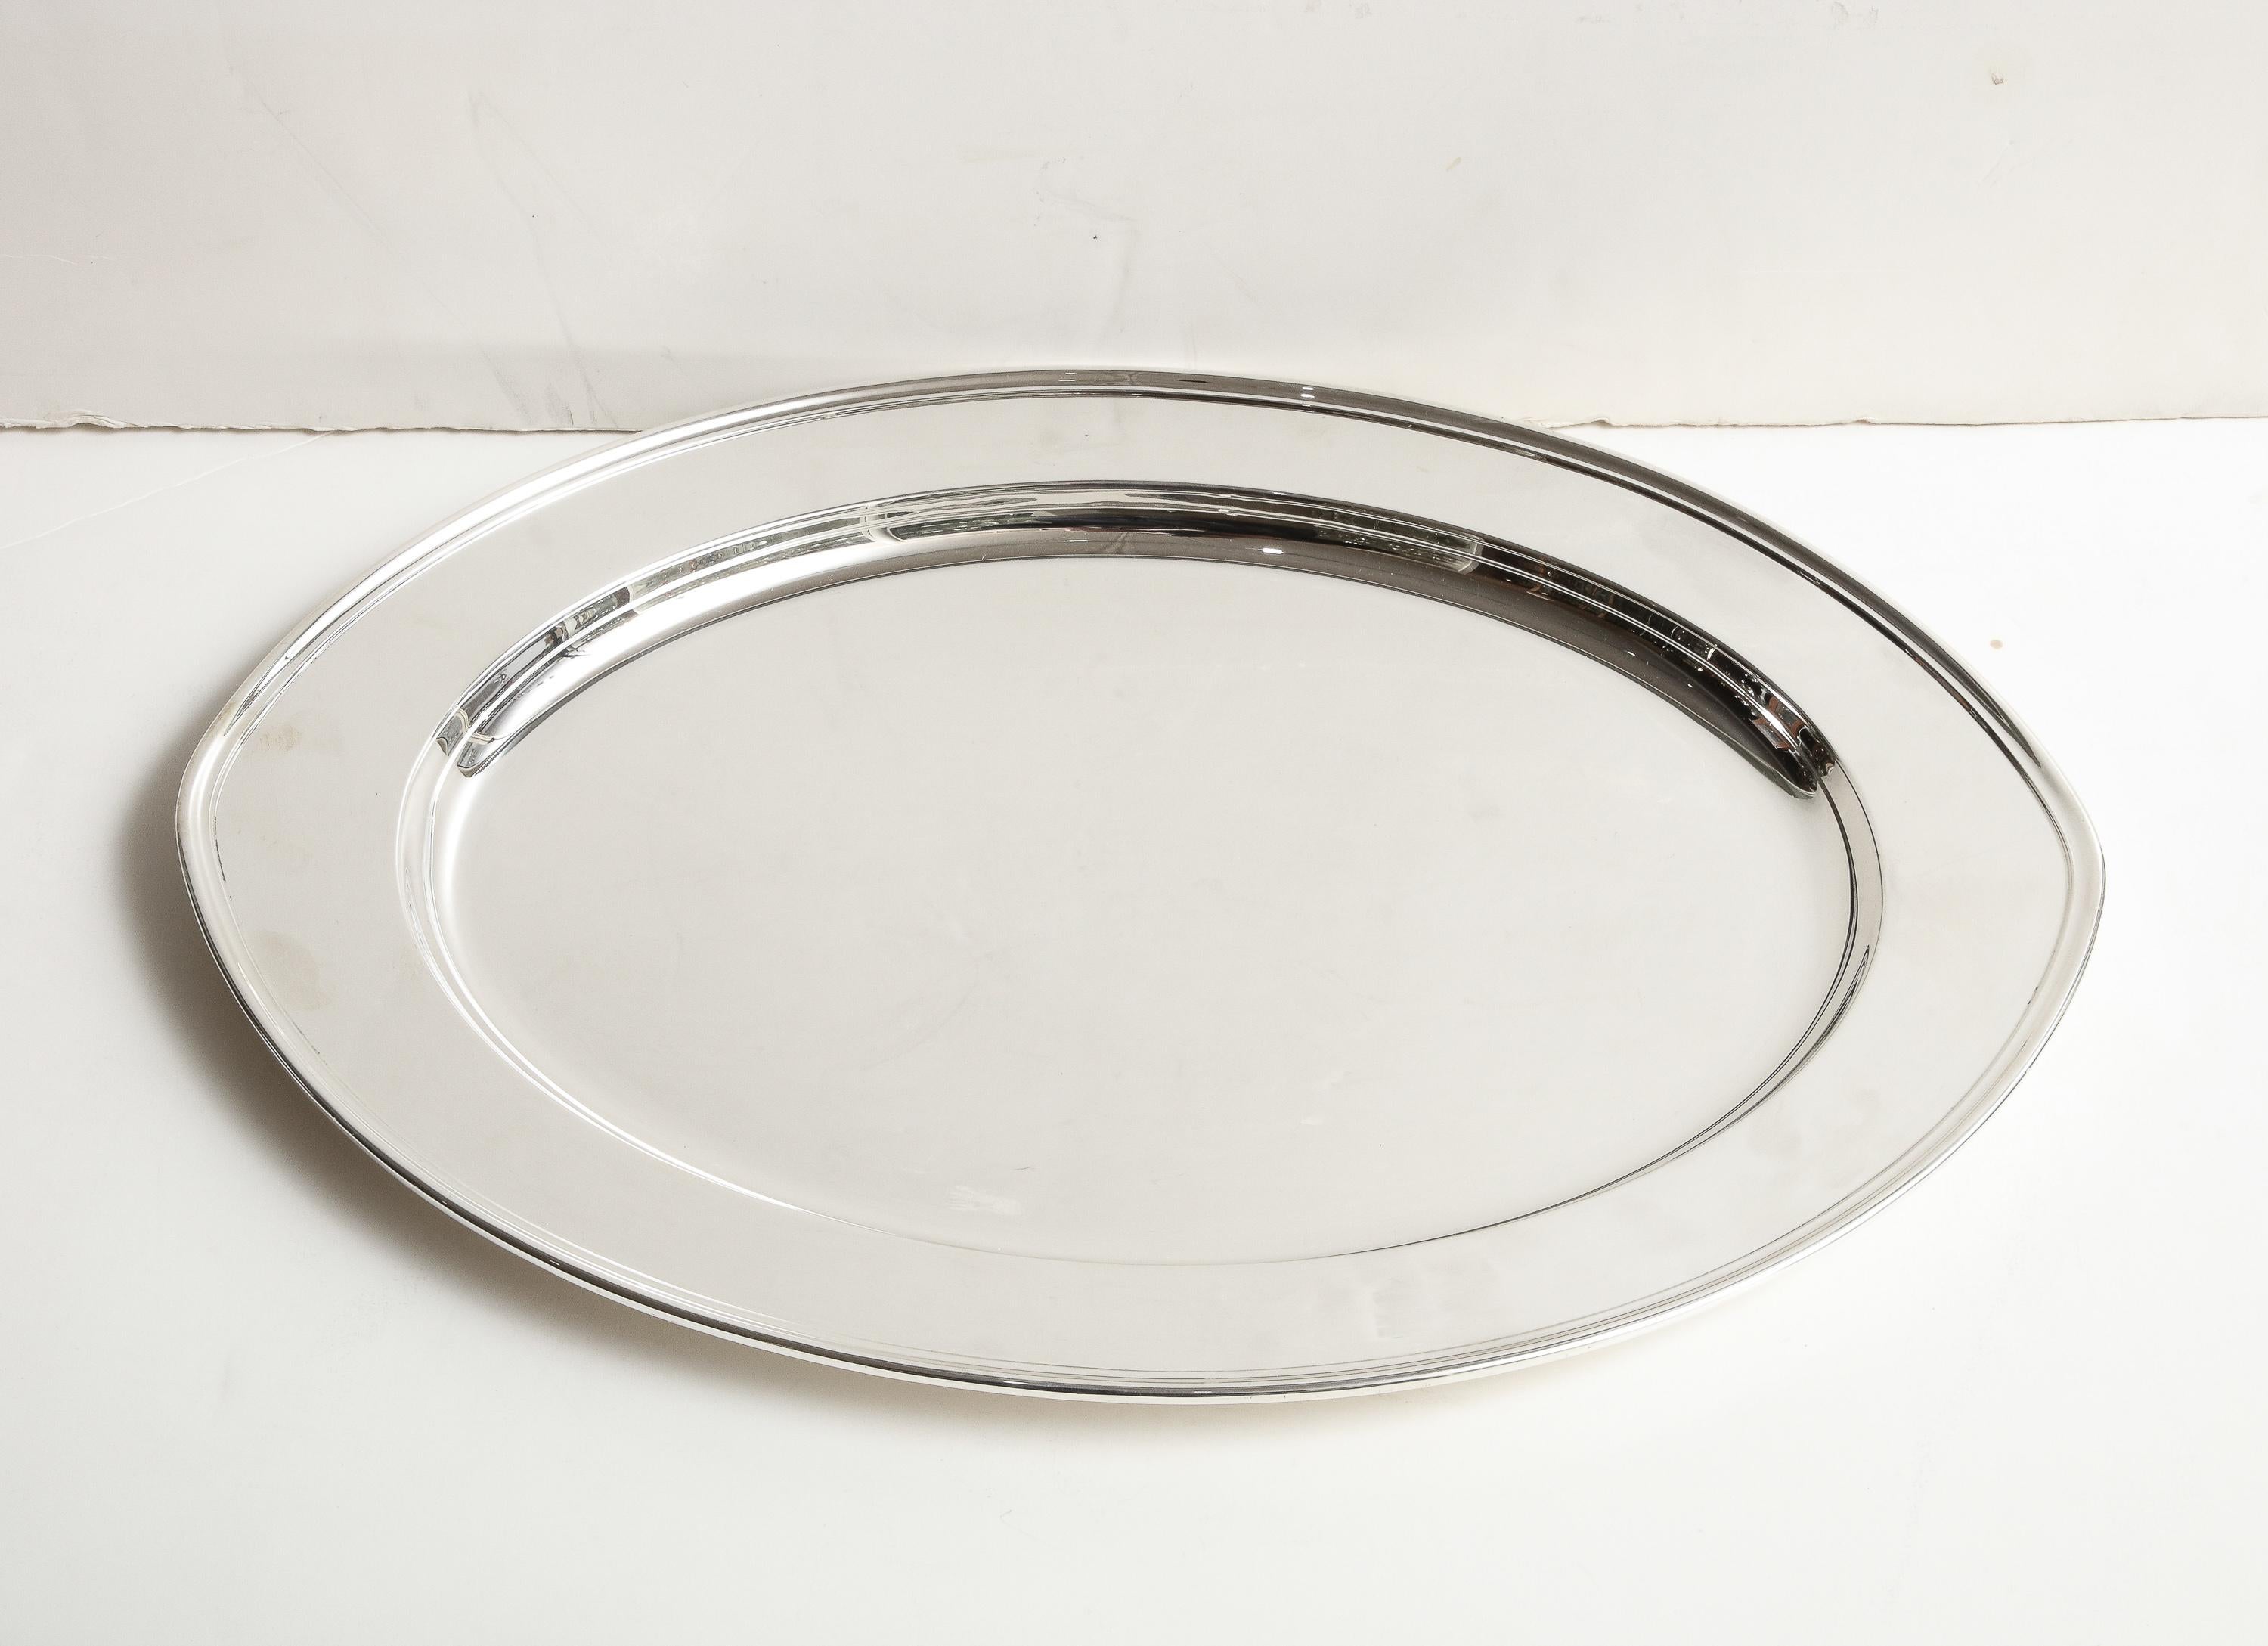 Large,  Art Deco Period, solid sterling silver serving platter/tray, Gorham Manufacturing Co., Providence, Rhode Island, year-hallmarked for 1933. Measures 18 3/4 inches wide (at widest point)  x 13 1/4 inches deep (at deepest point) x 1 inch high